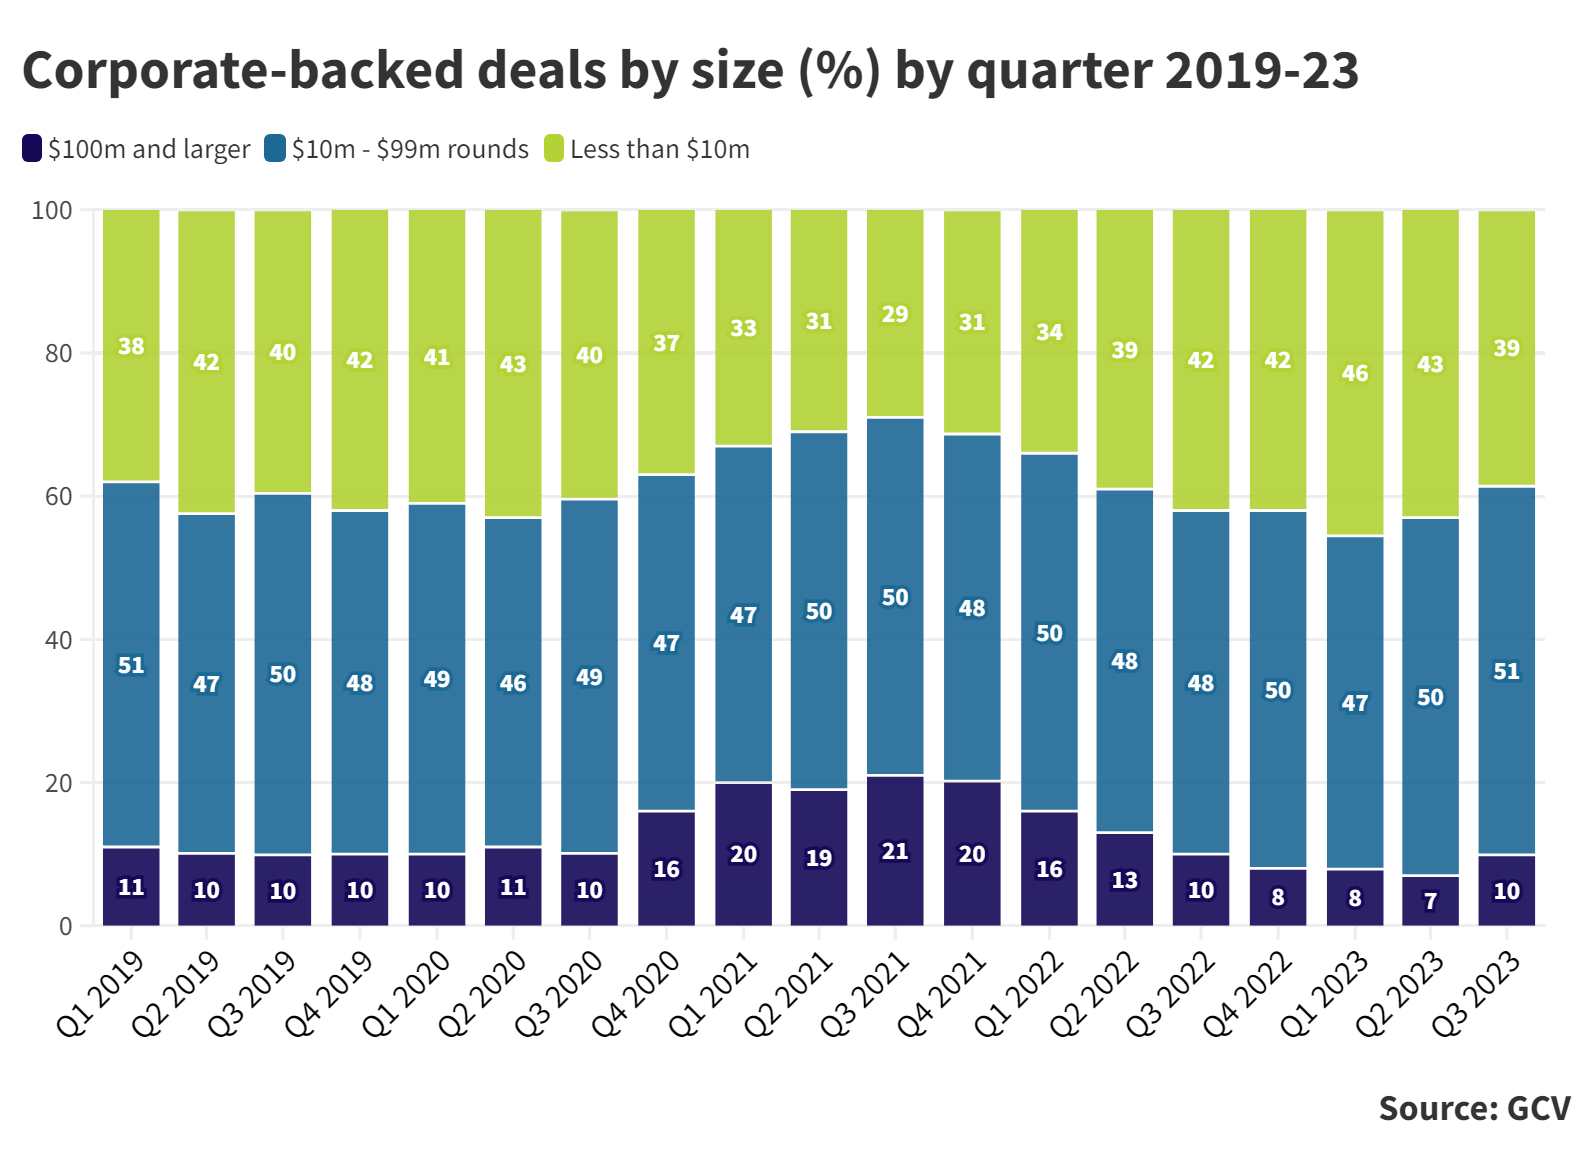 Stacked bar chart showing corporate-backed deals by size (%) by quarter 2019-23. Source: GCV